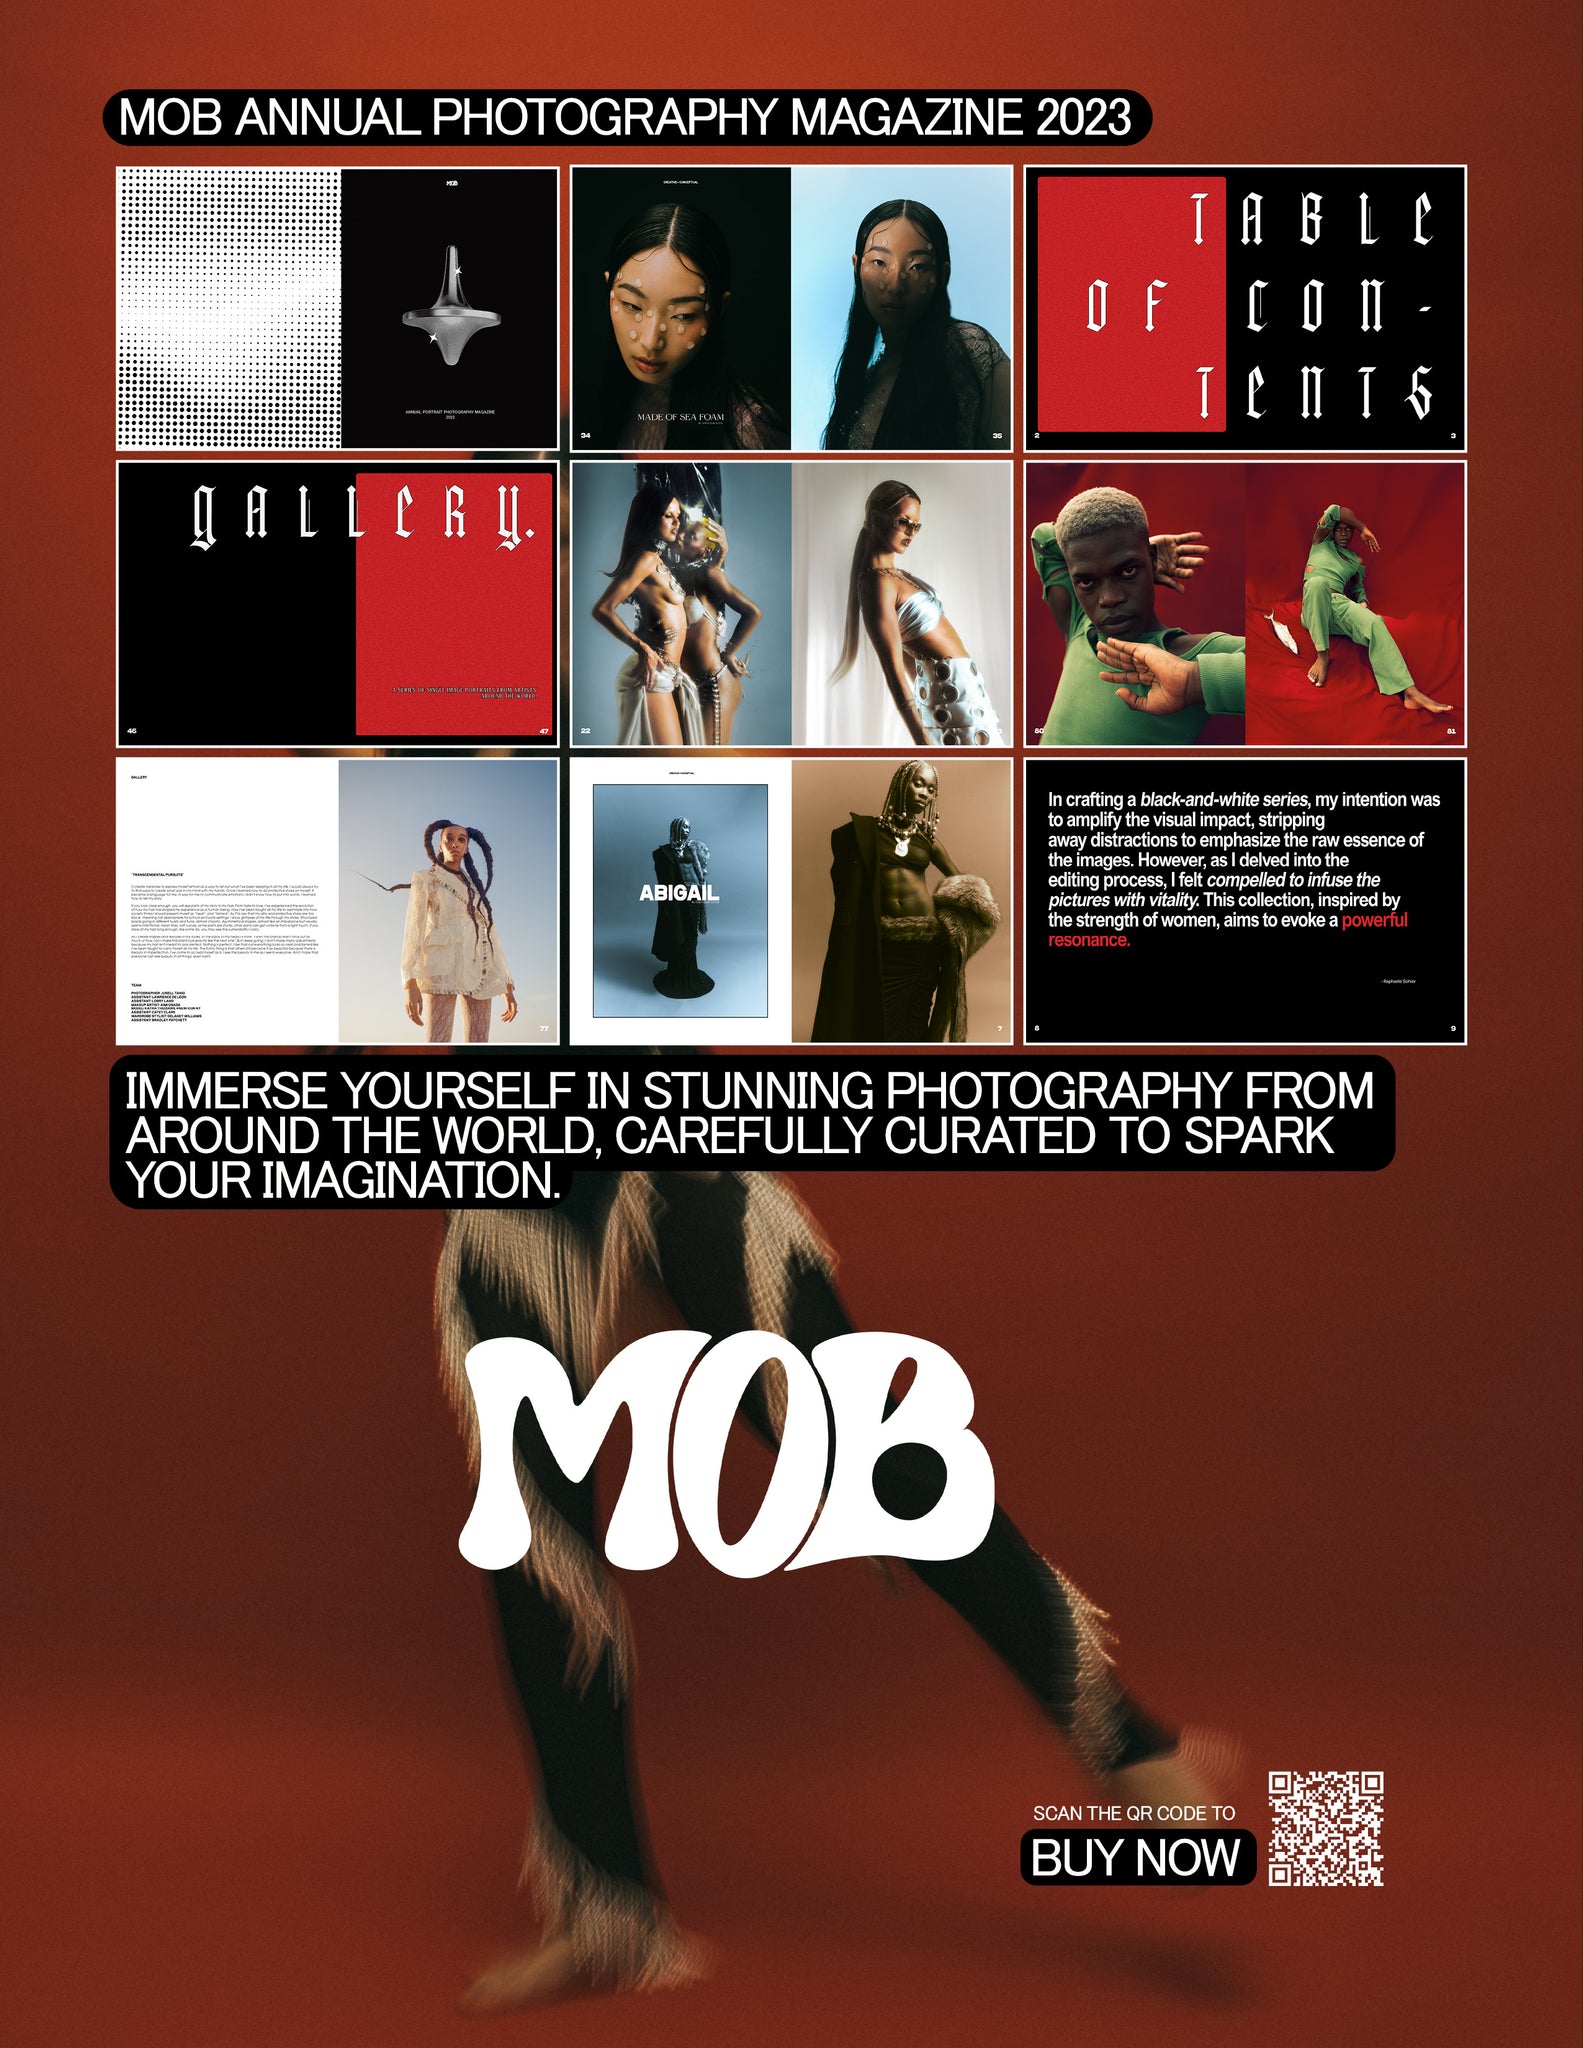 MOB JOURNAL | VOLUME FIFTY | ISSUE #44